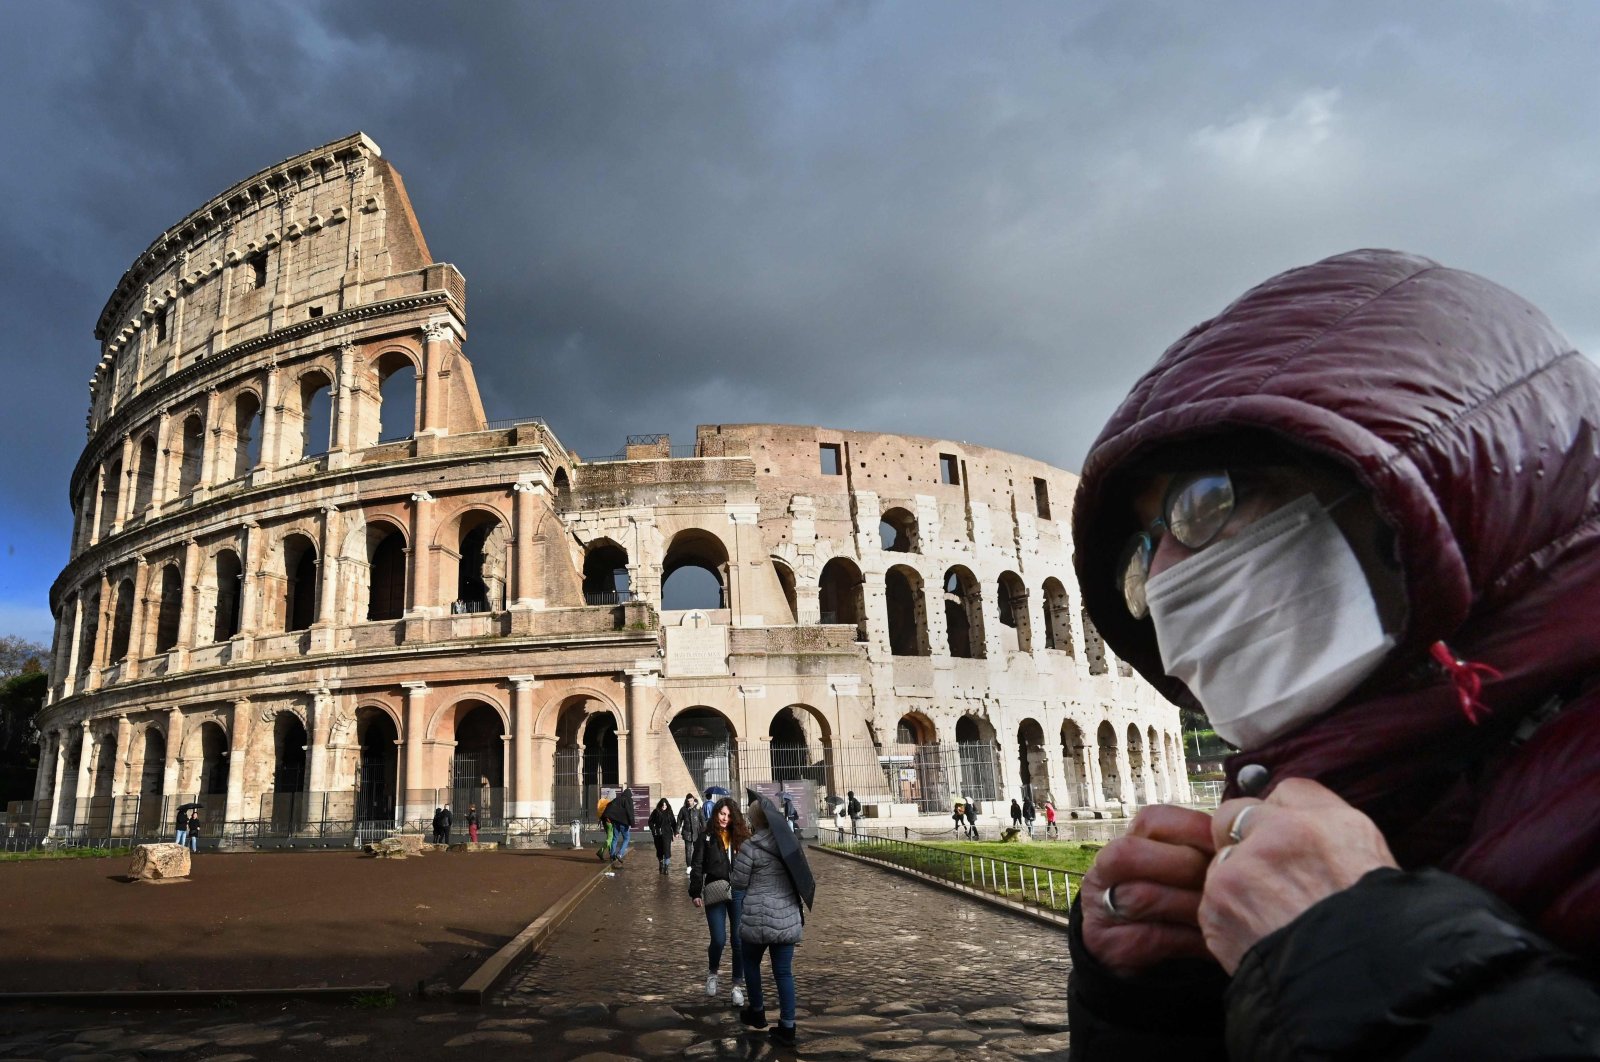 A man wearing a protective mask passes by the Colosseum amid the COVID-19 pandemic in Rome, Italy, March 7, 2020. (AFP Photo)